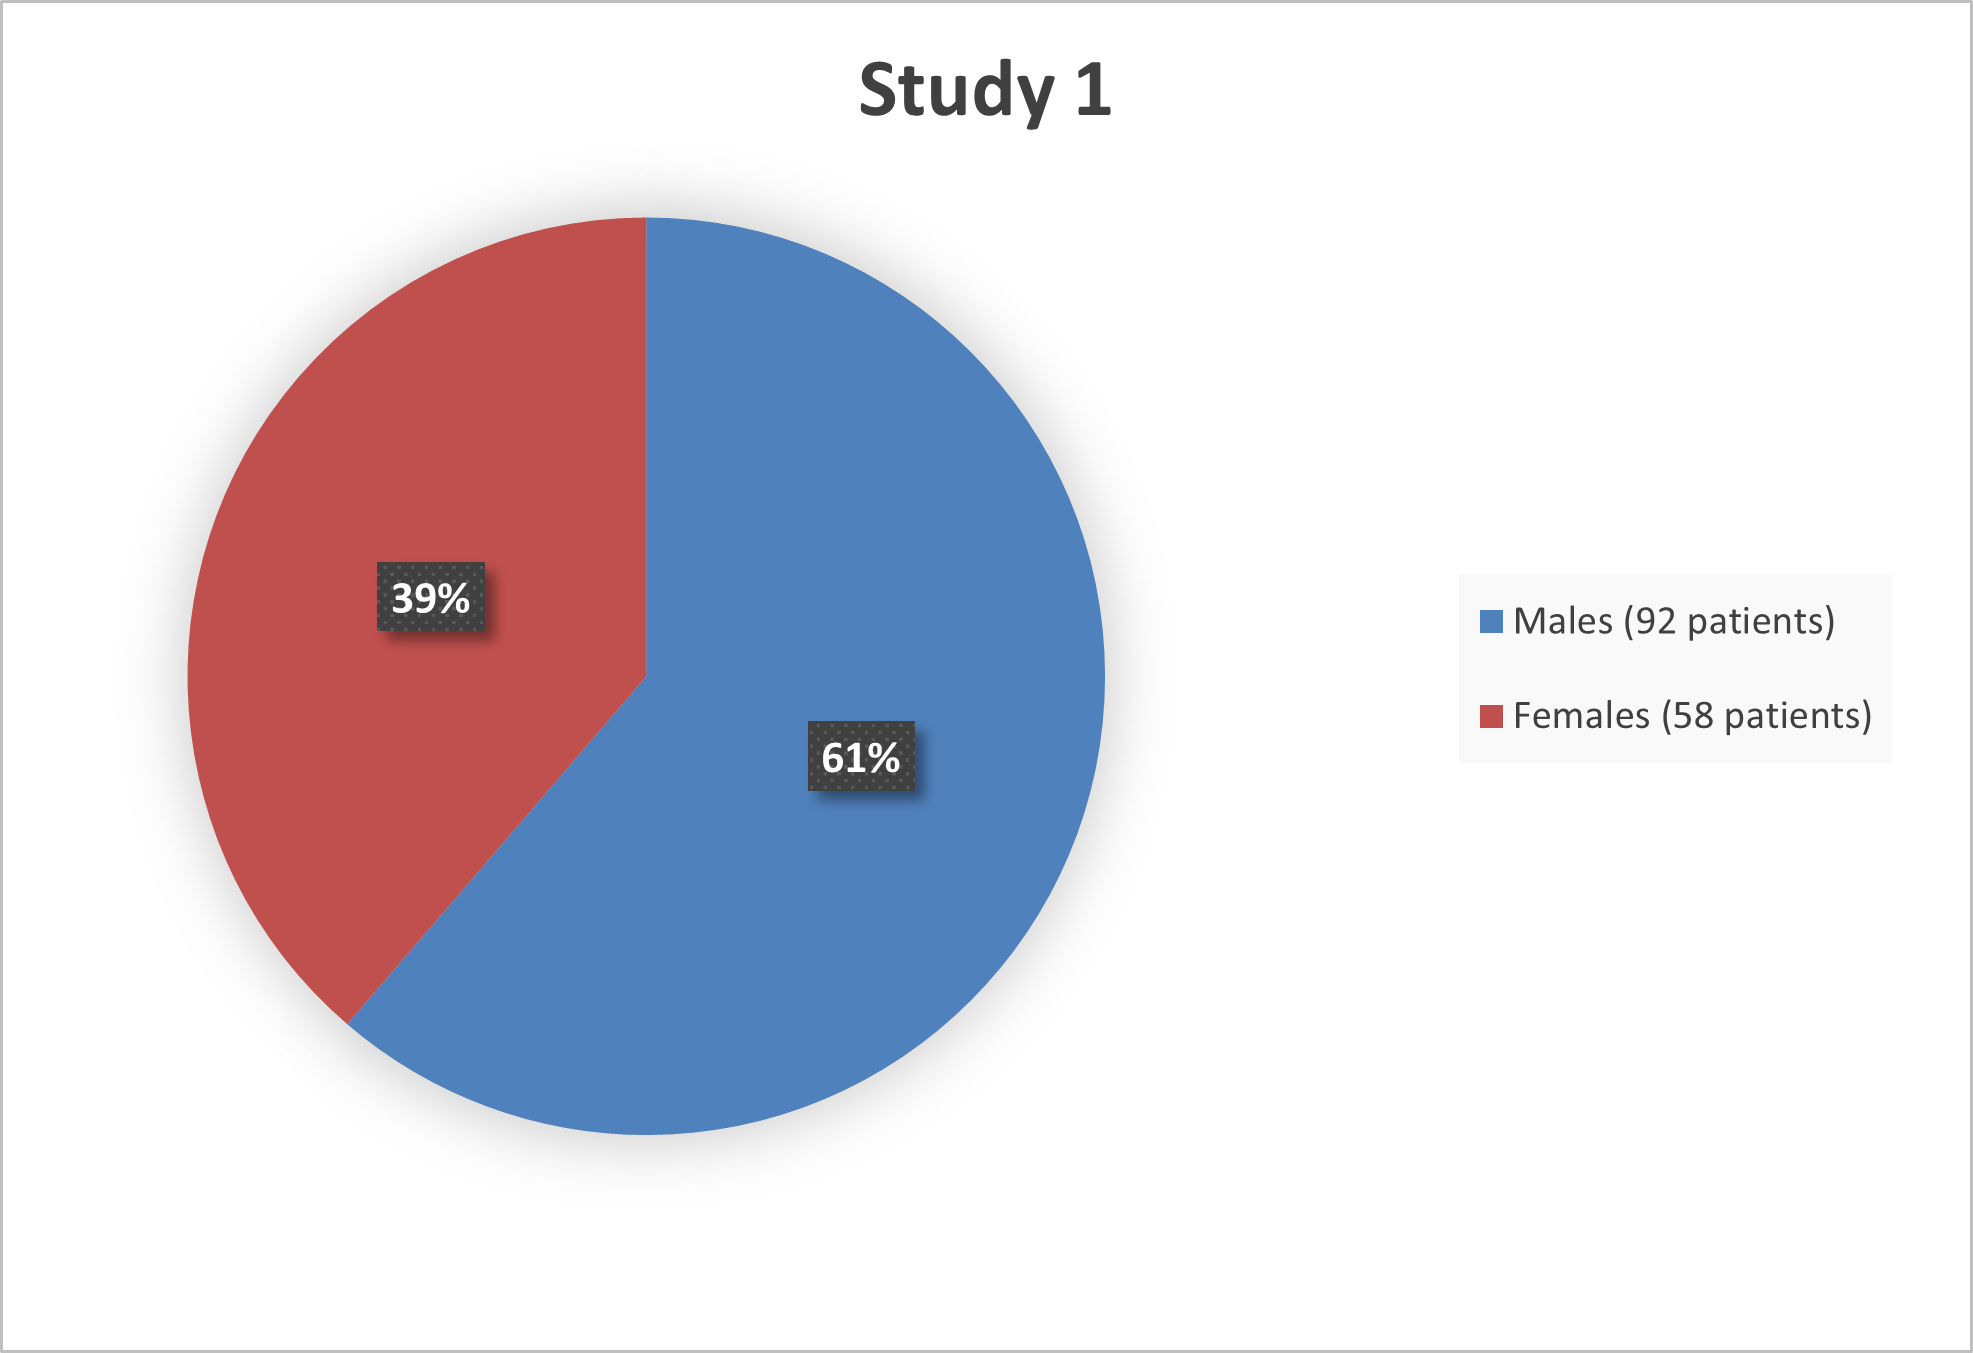 Figures 1 summarize the percentage of patients by sex that were enrolled in trials used to evaluate the efficacy and safety of AZSTARYS